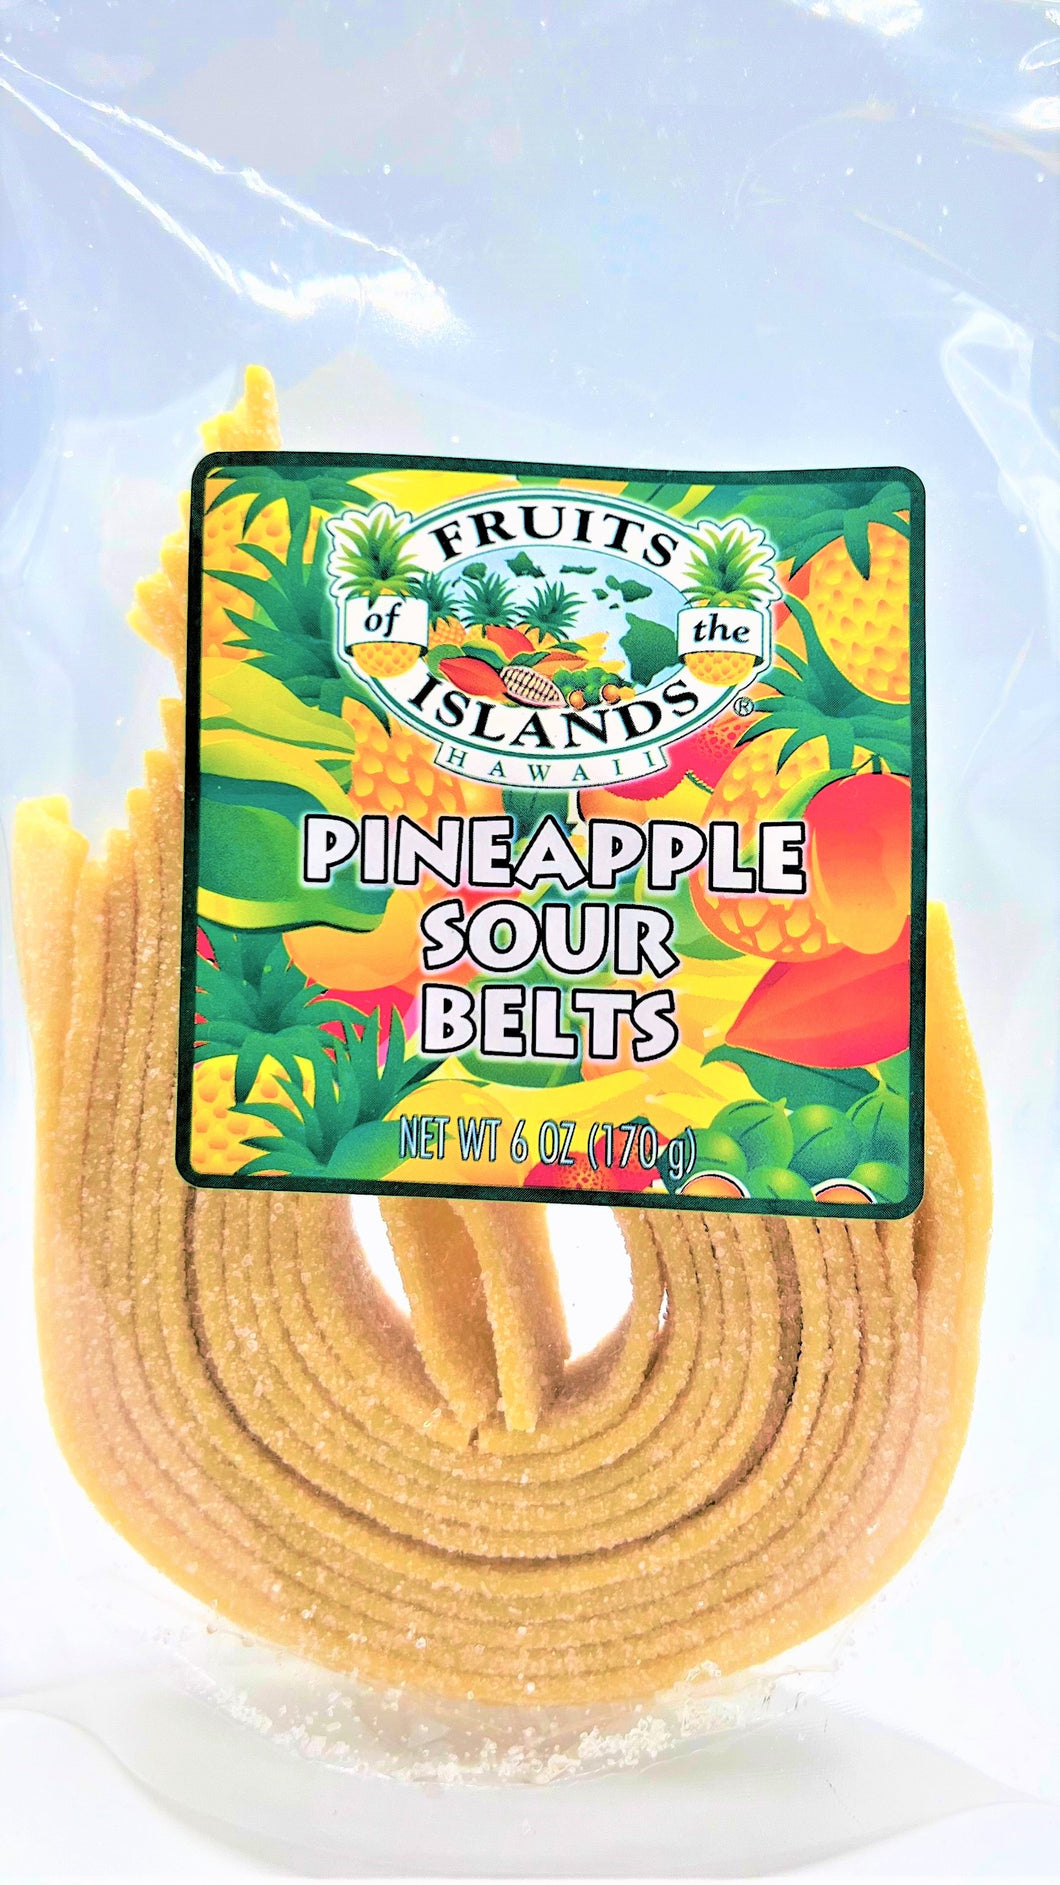 Pineapple Sour Belts Candy 6oz (170g)